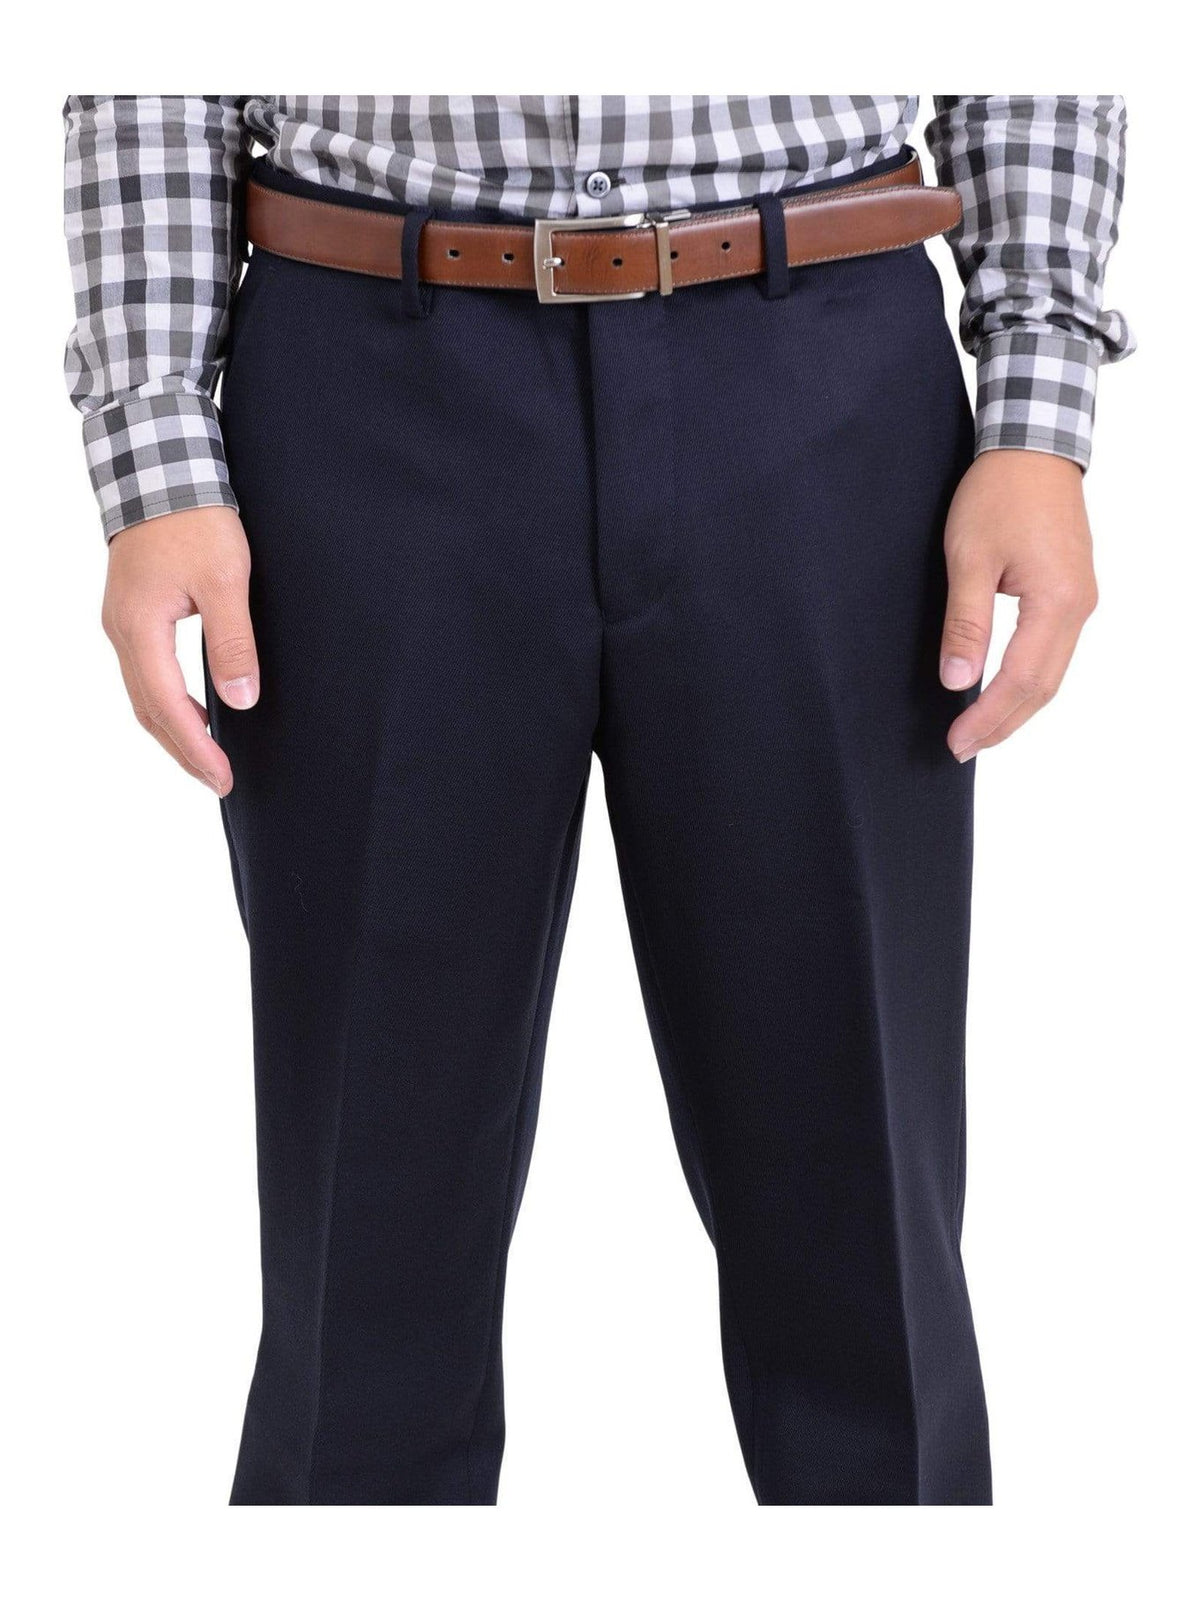 Ideal Sale Pants 32W Ideal Slim Fit Solid Navy Blue Twill Flat Front Wool Dress Pants